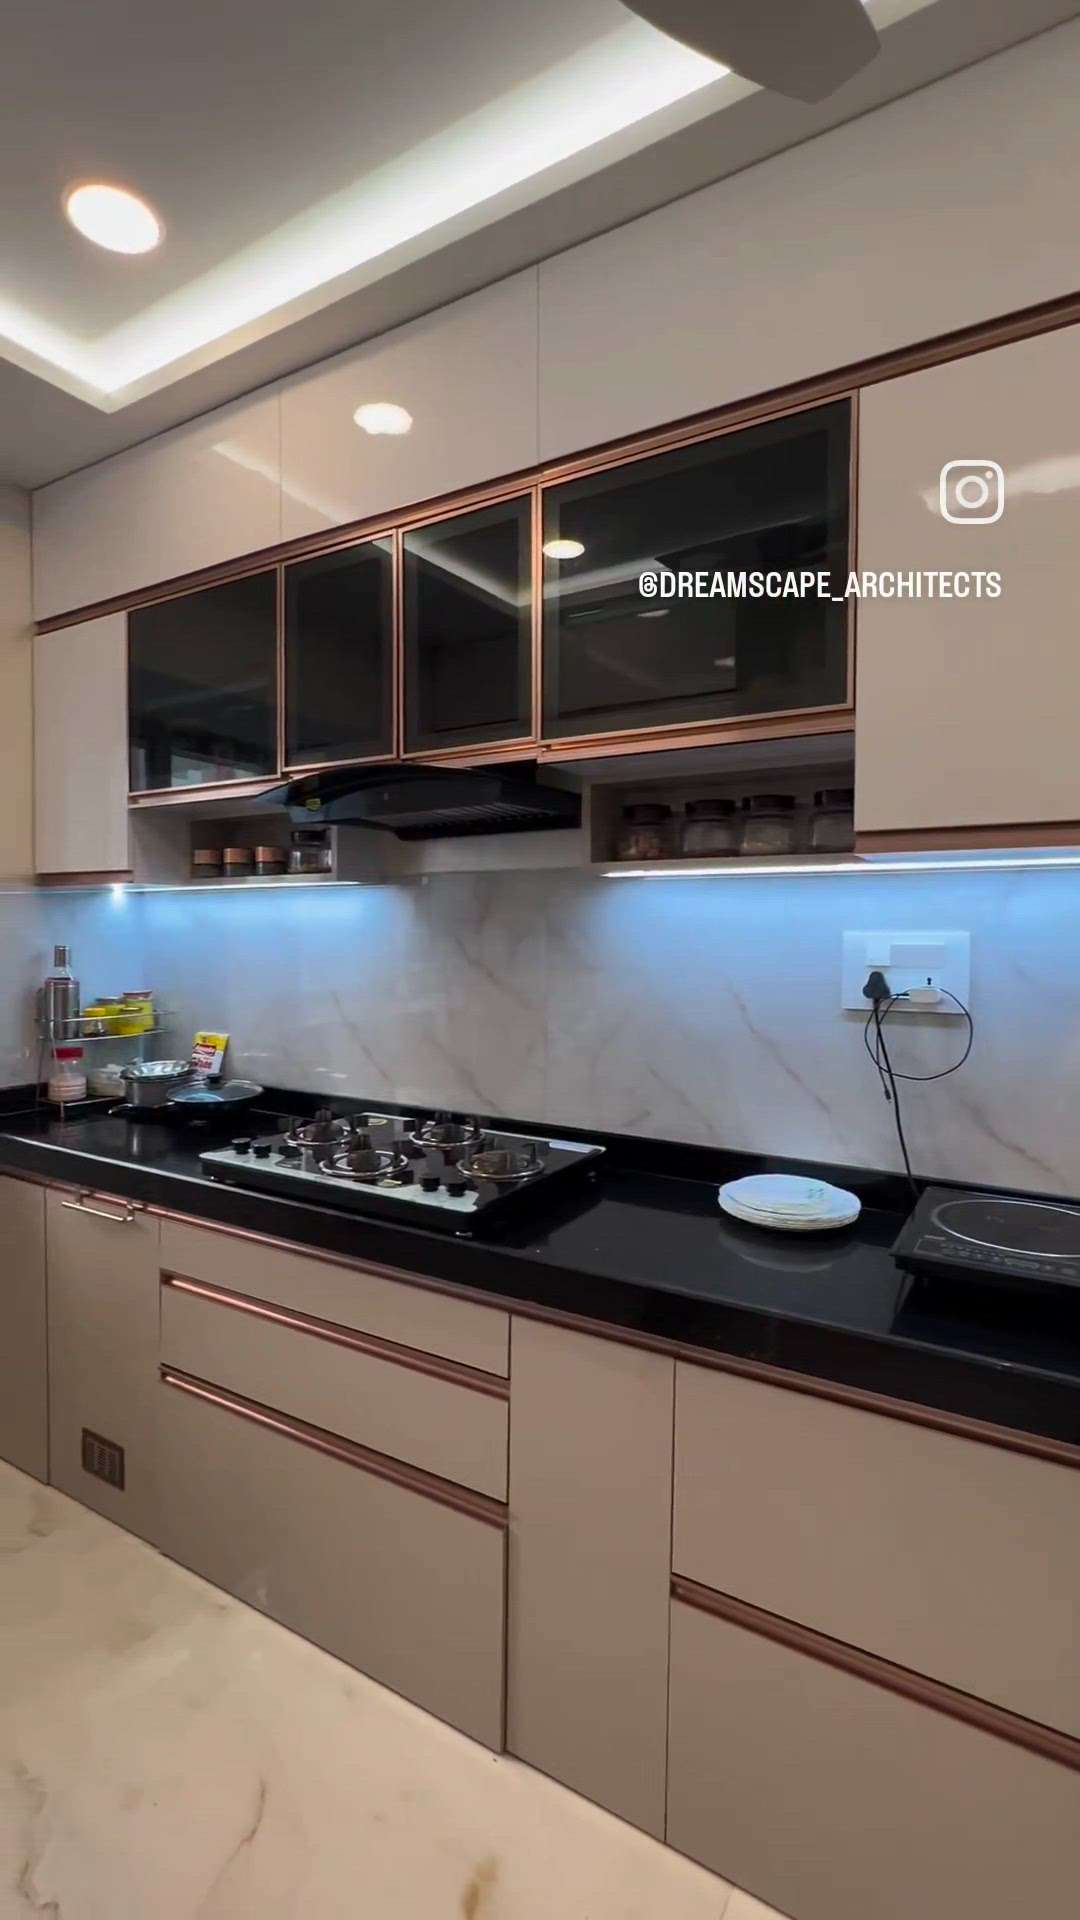 Modular kitchen work in Bhopal
contact no. 8103482666
#ModularKitchen #kitchen #kitchenwork #Cabinet #KitchenCabinet #KitchenIdeas #modularkitchendesign #bhopal #modular #ply #Carpenter